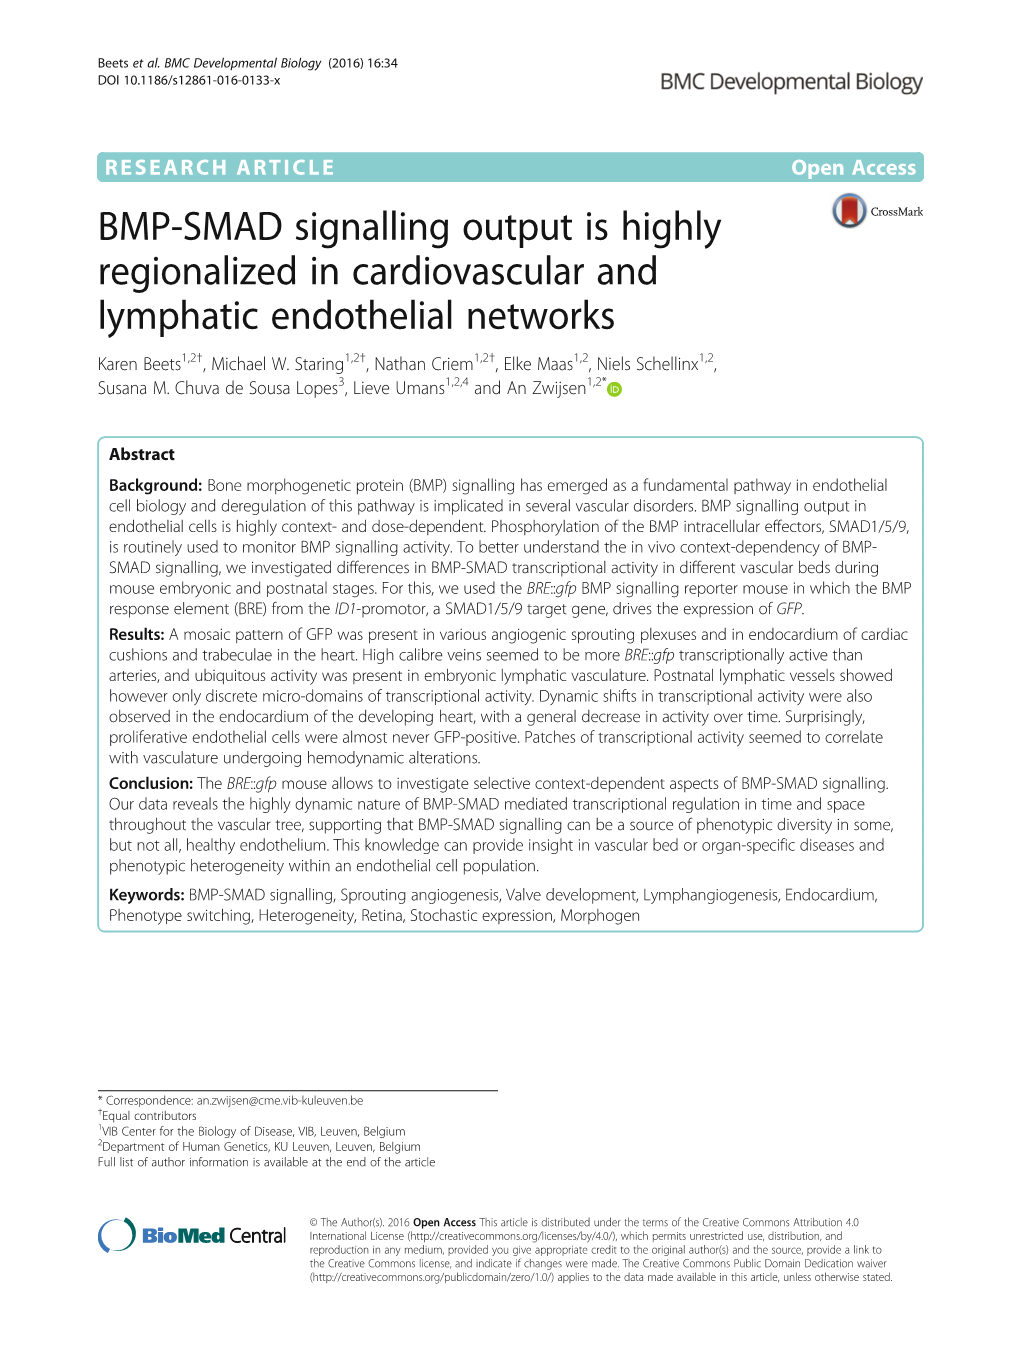 BMP-SMAD Signalling Output Is Highly Regionalized in Cardiovascular and Lymphatic Endothelial Networks Karen Beets1,2†, Michael W